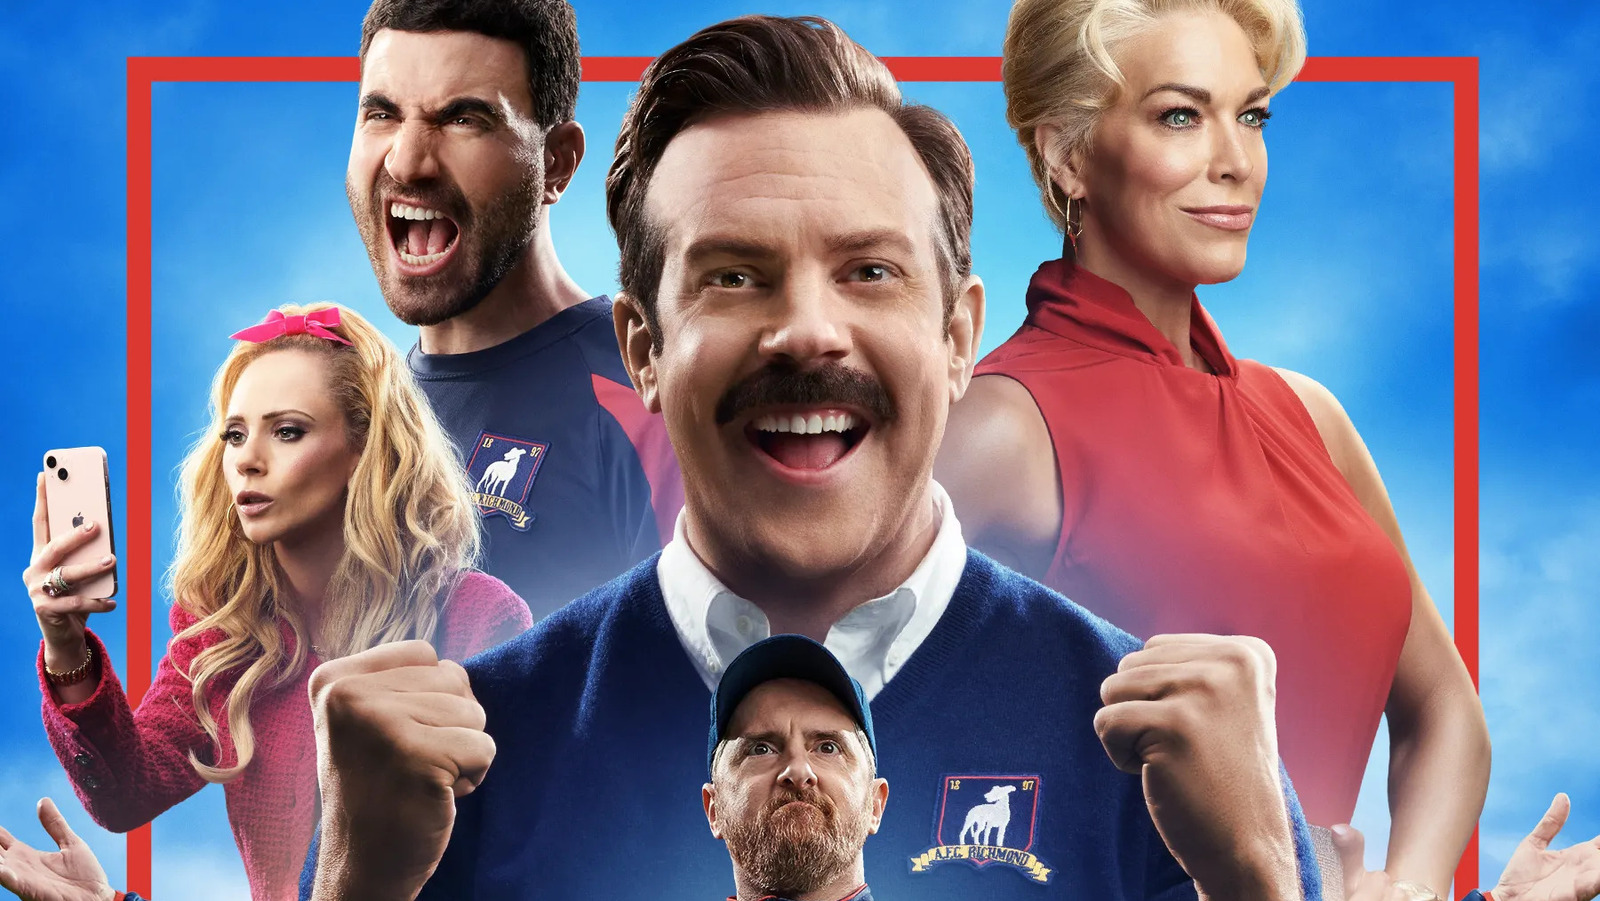 Stream ‘Ted Lasso’ Without Spending A Dime With This Free Apple TV+ Promo – SlashGear